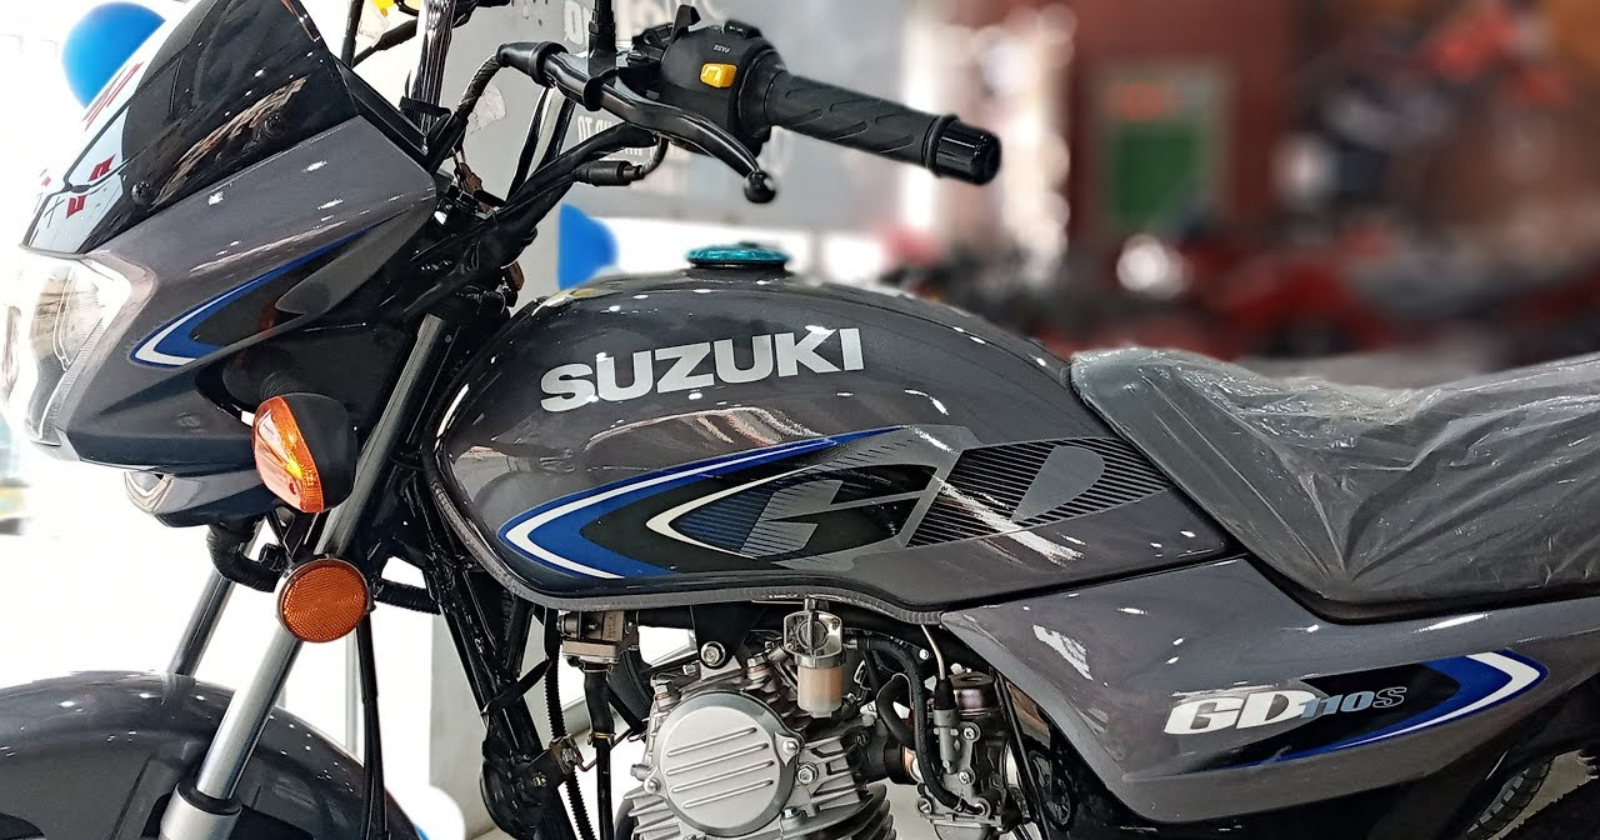 Suzuki GD 110 S Latest Price and Instalment Plan for July 2023